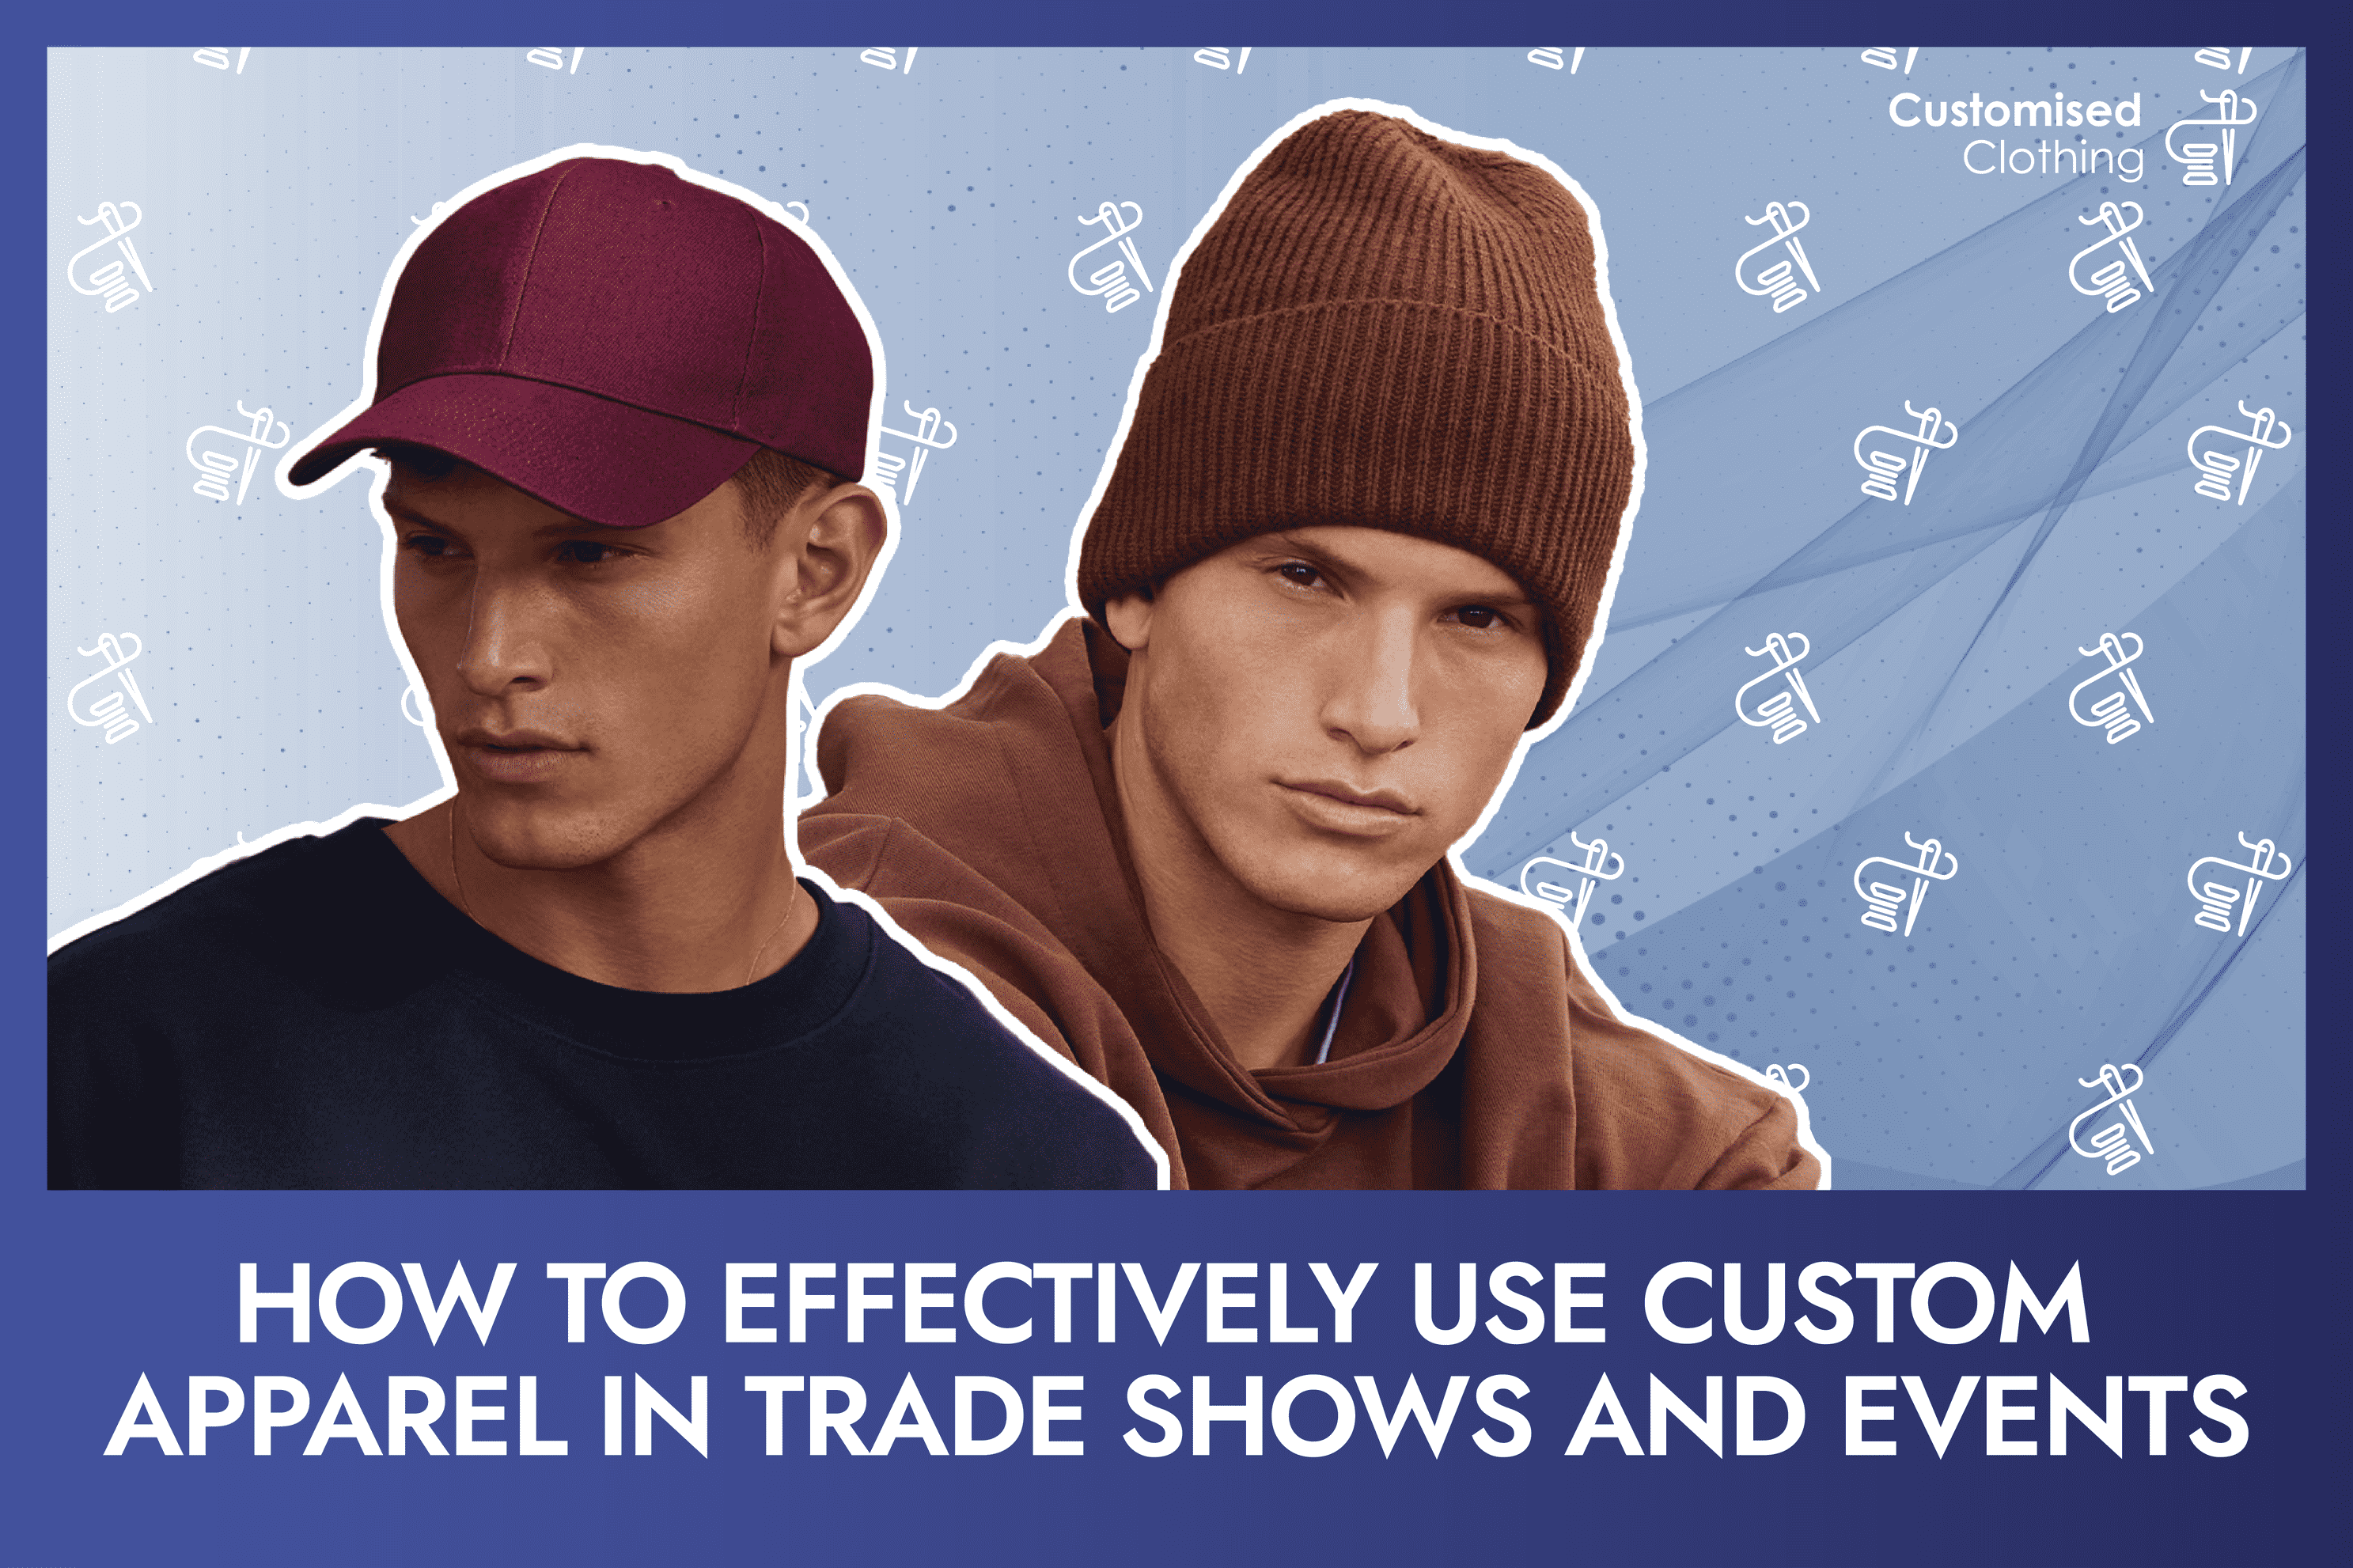 How to Effectively Use Custom Apparel in Trade Shows and Events